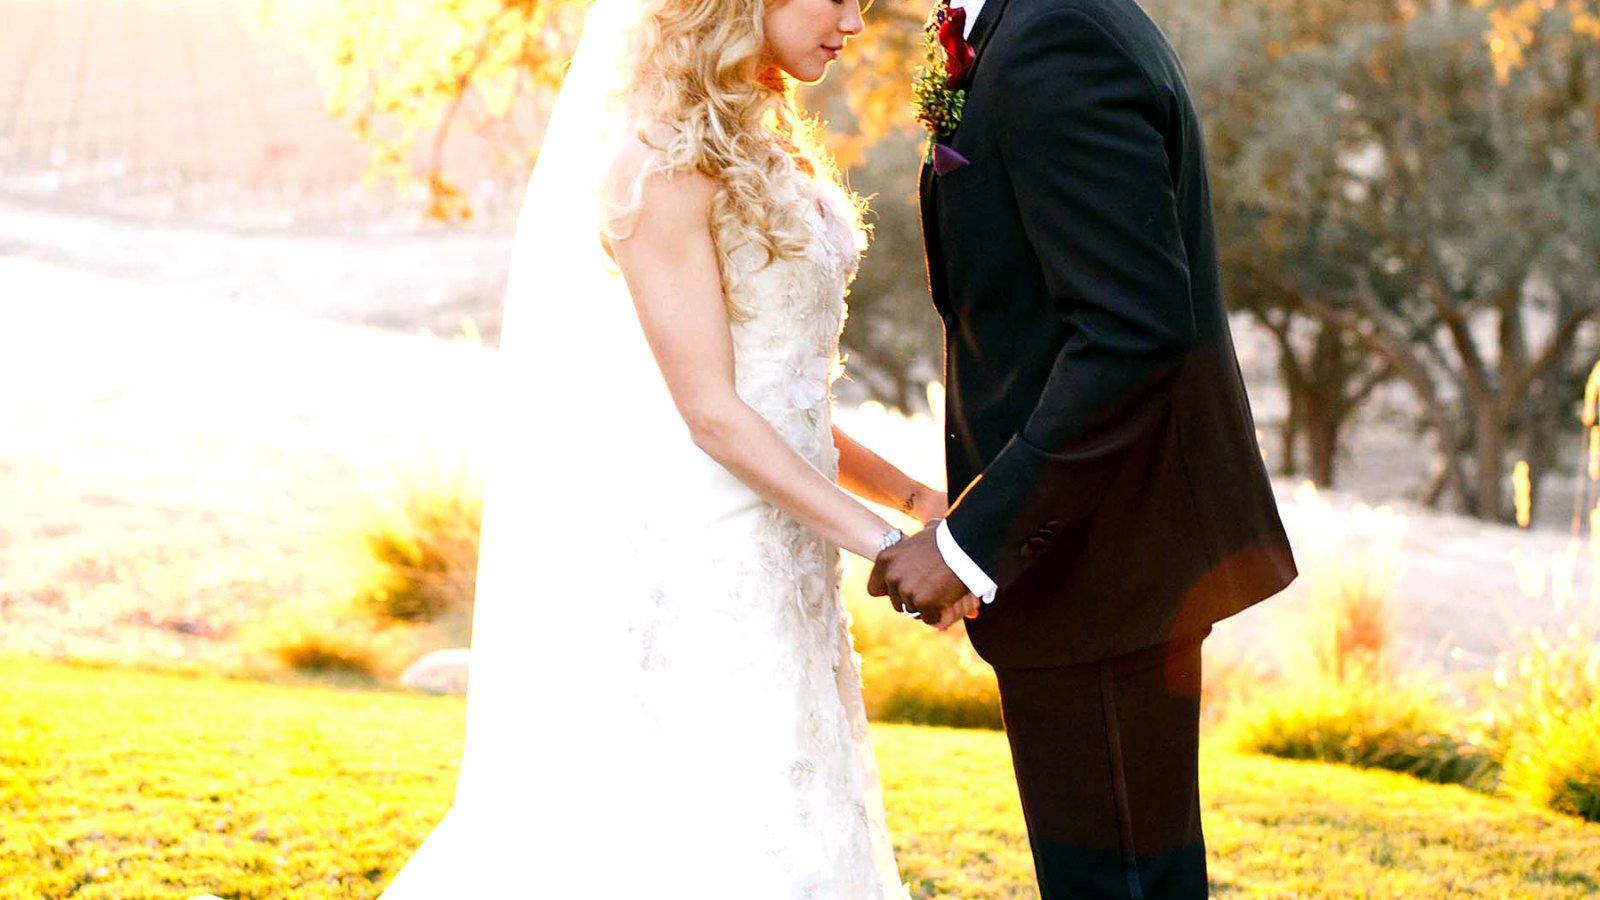 Allison Holker and Twitch Boss pose for wedding pictures